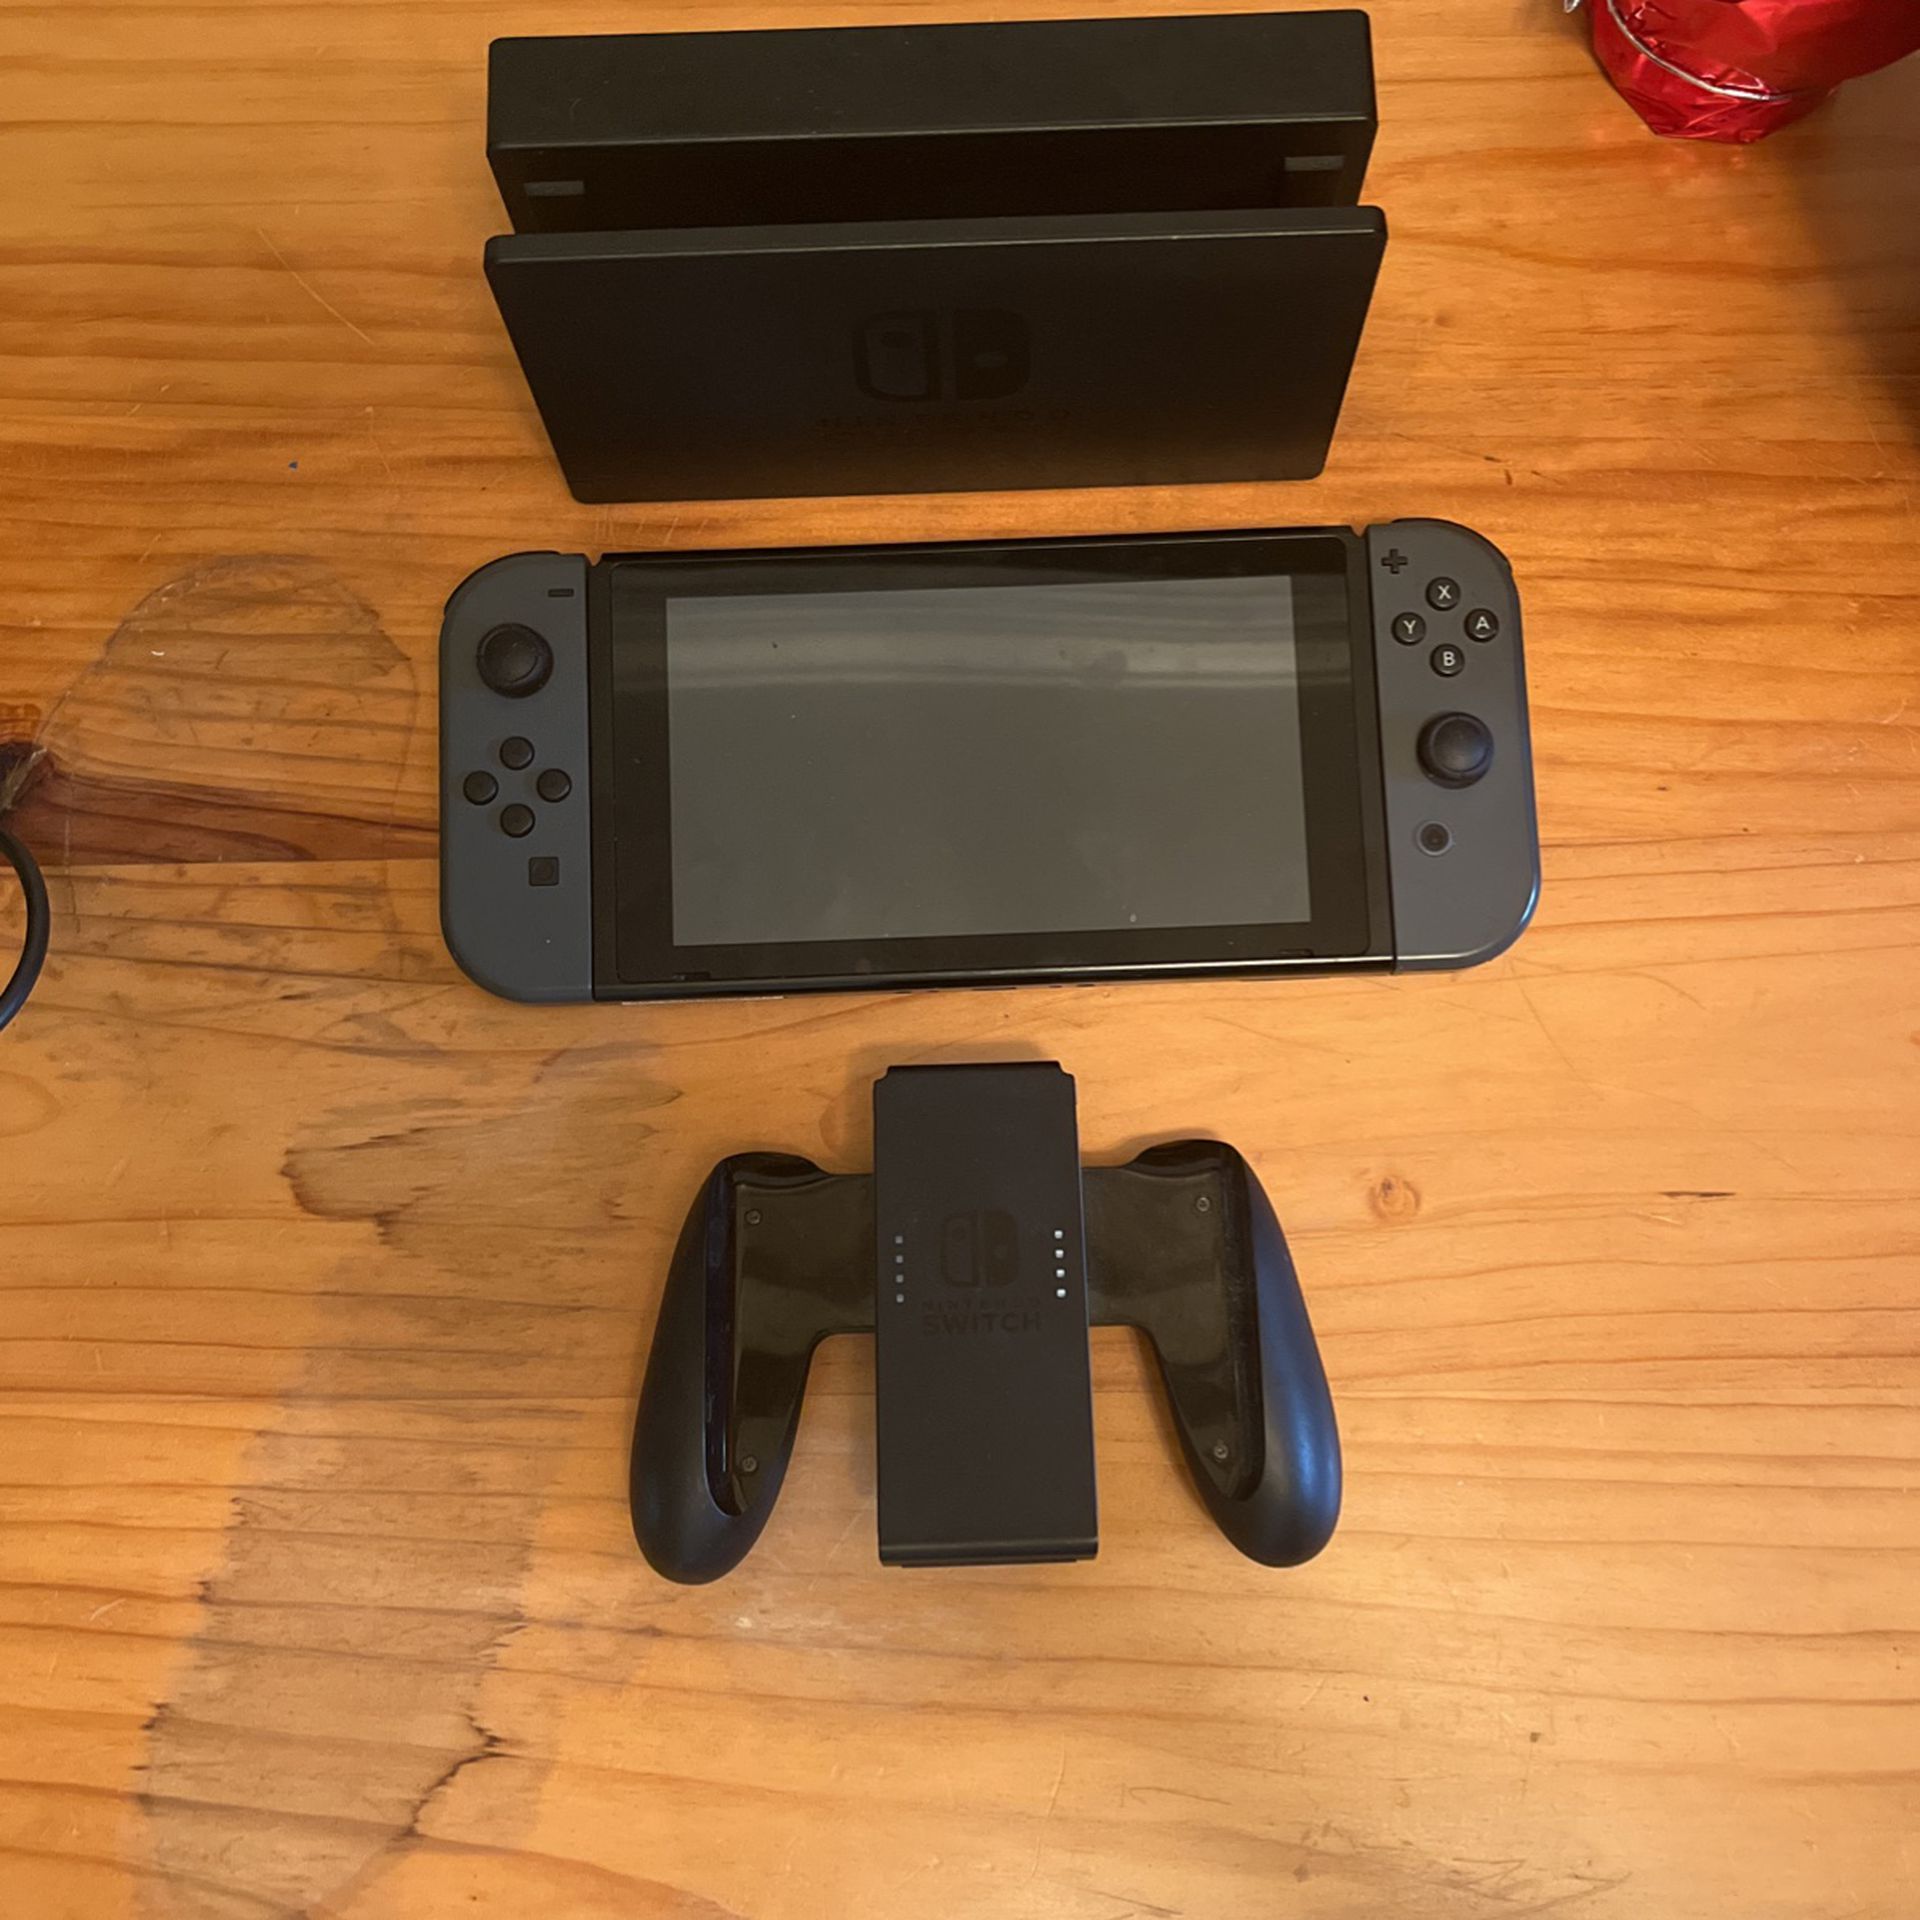 Nintendo Switch Console w/ Joy Con Grip, Dock, And Charger